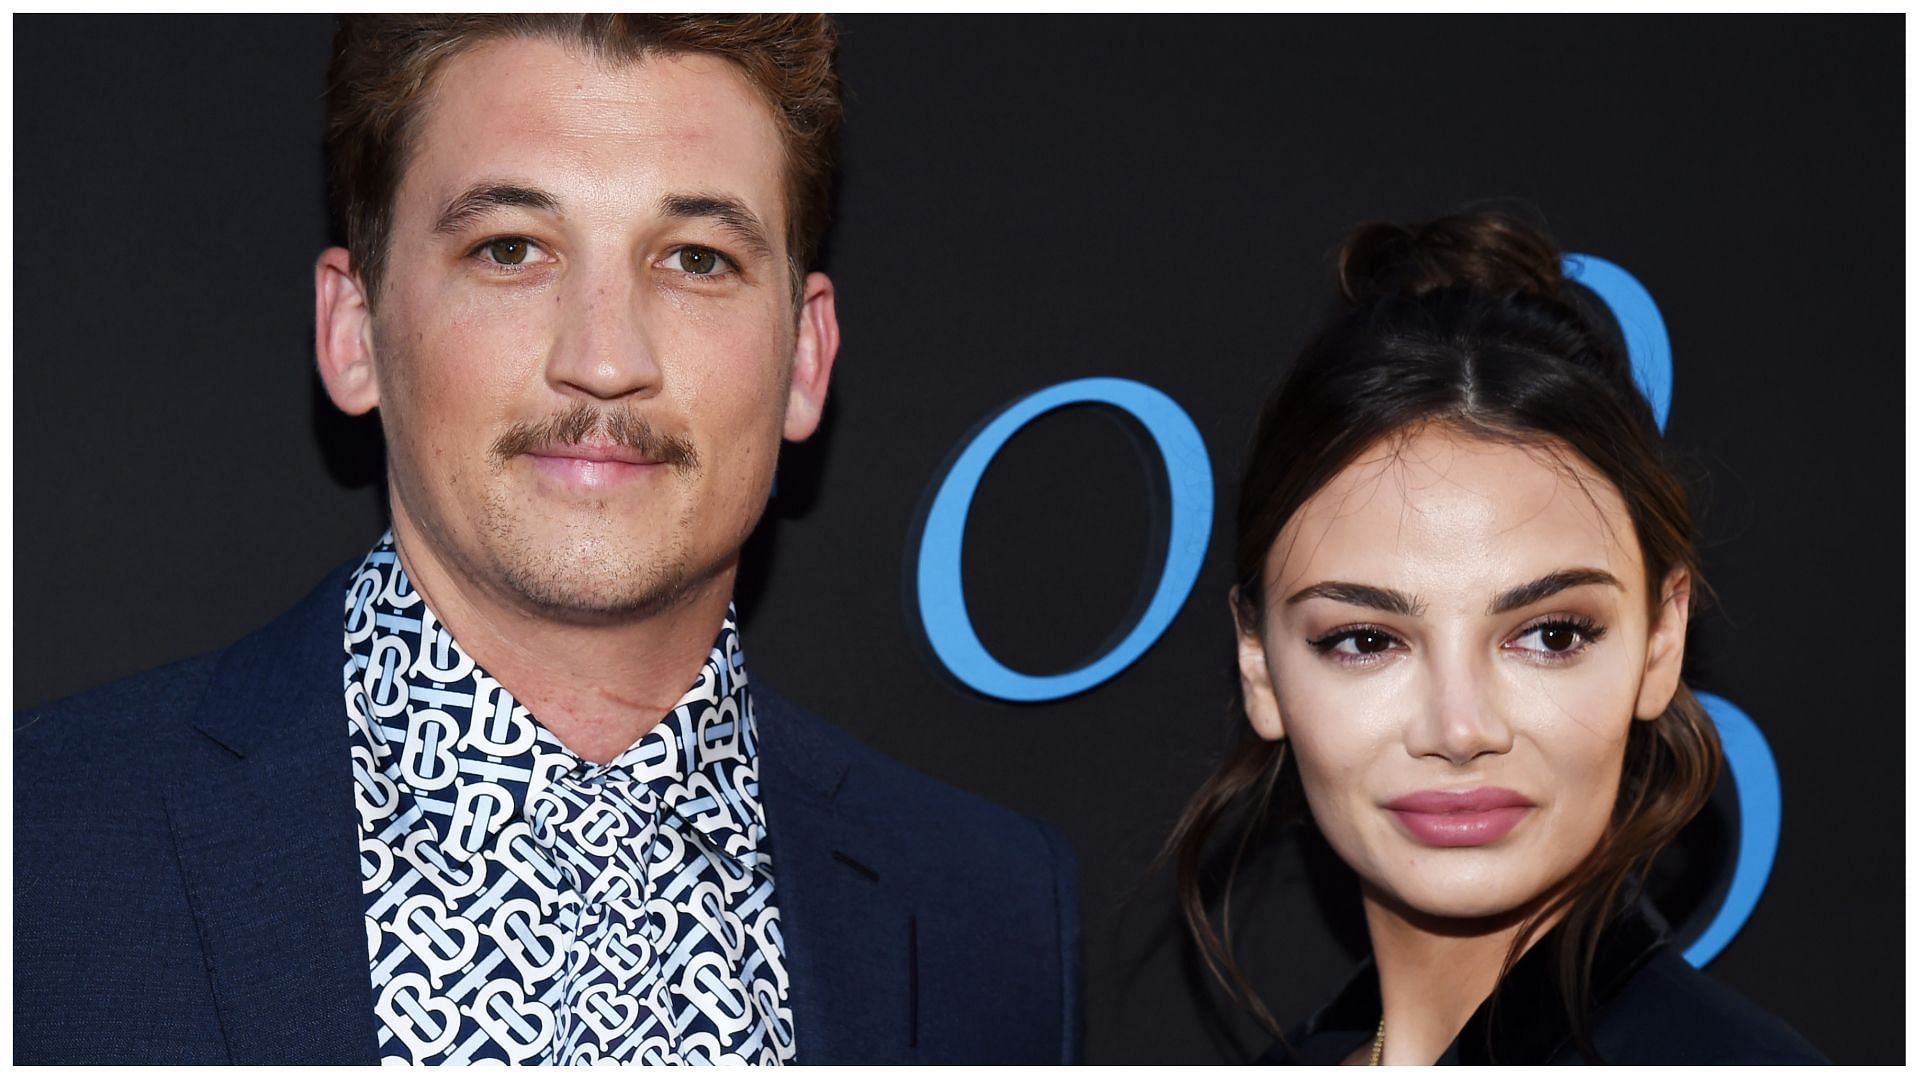 Miles Teller and Keleigh Sperry Teller started dating in 2013 and married in 2019. (Image via Amanda Edwards/Getty)